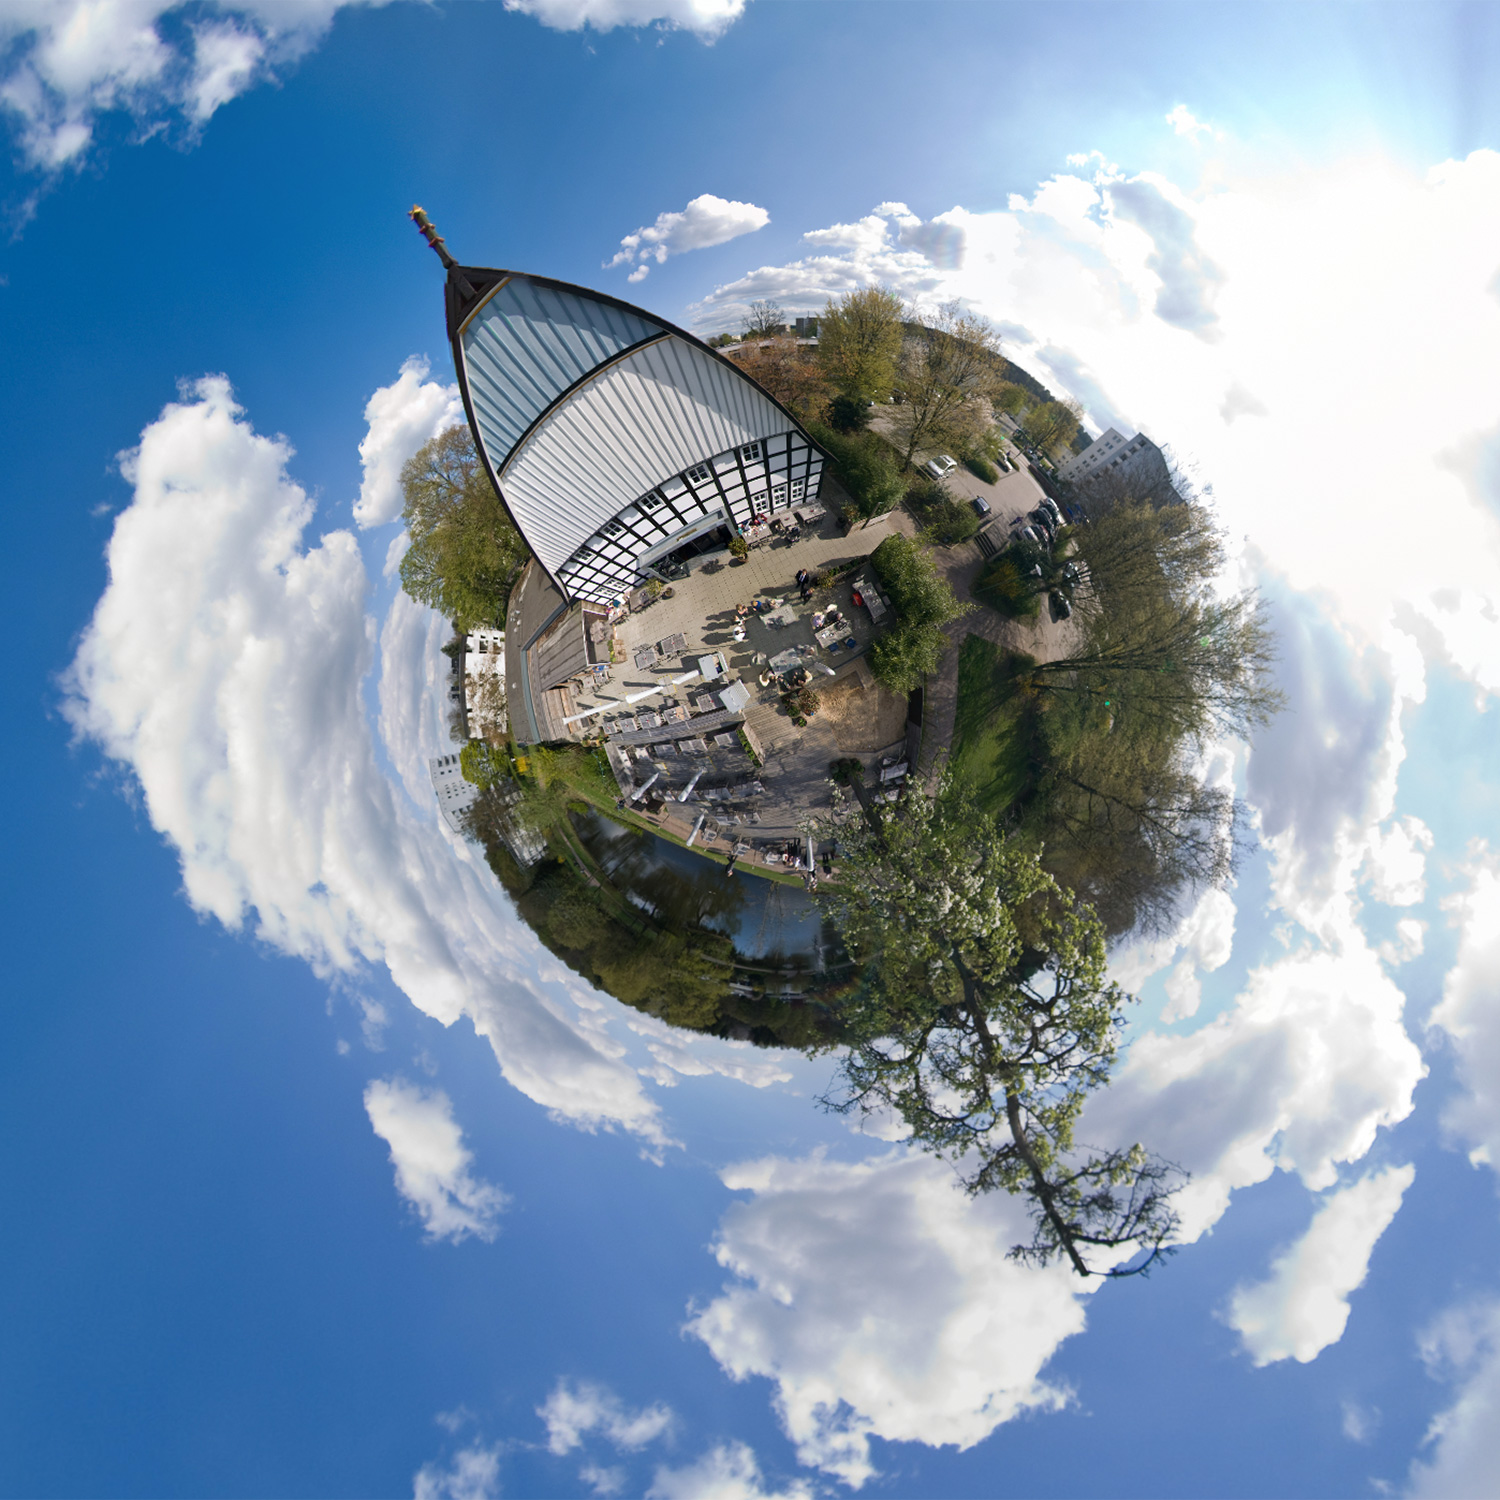 Panorama 069 - Little Planet